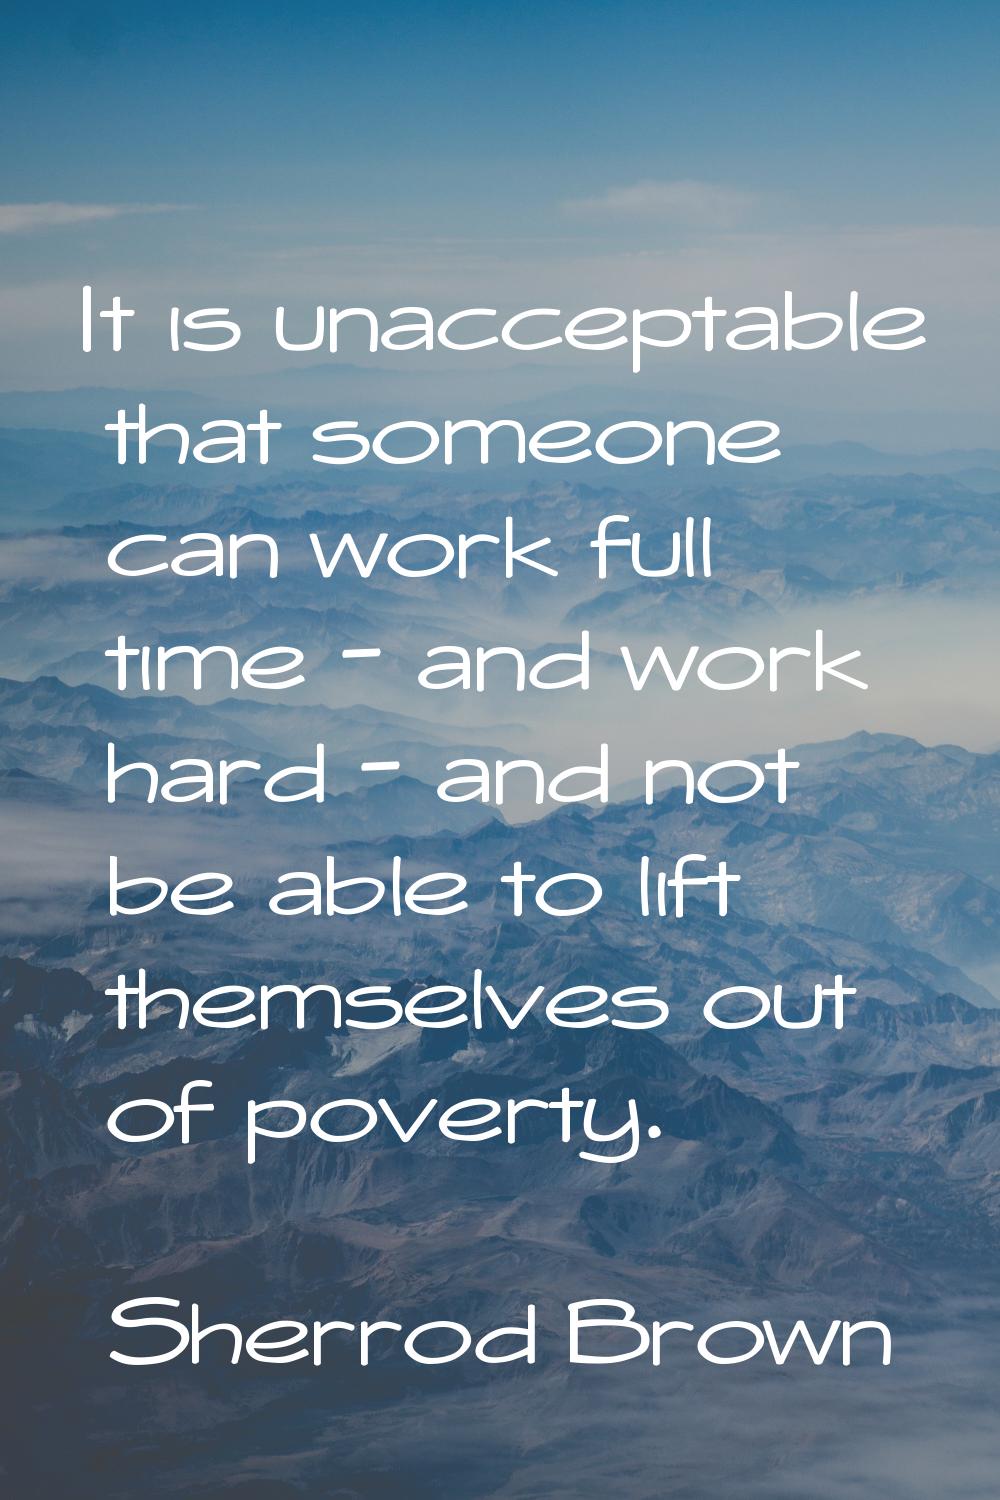 It is unacceptable that someone can work full time - and work hard - and not be able to lift themse